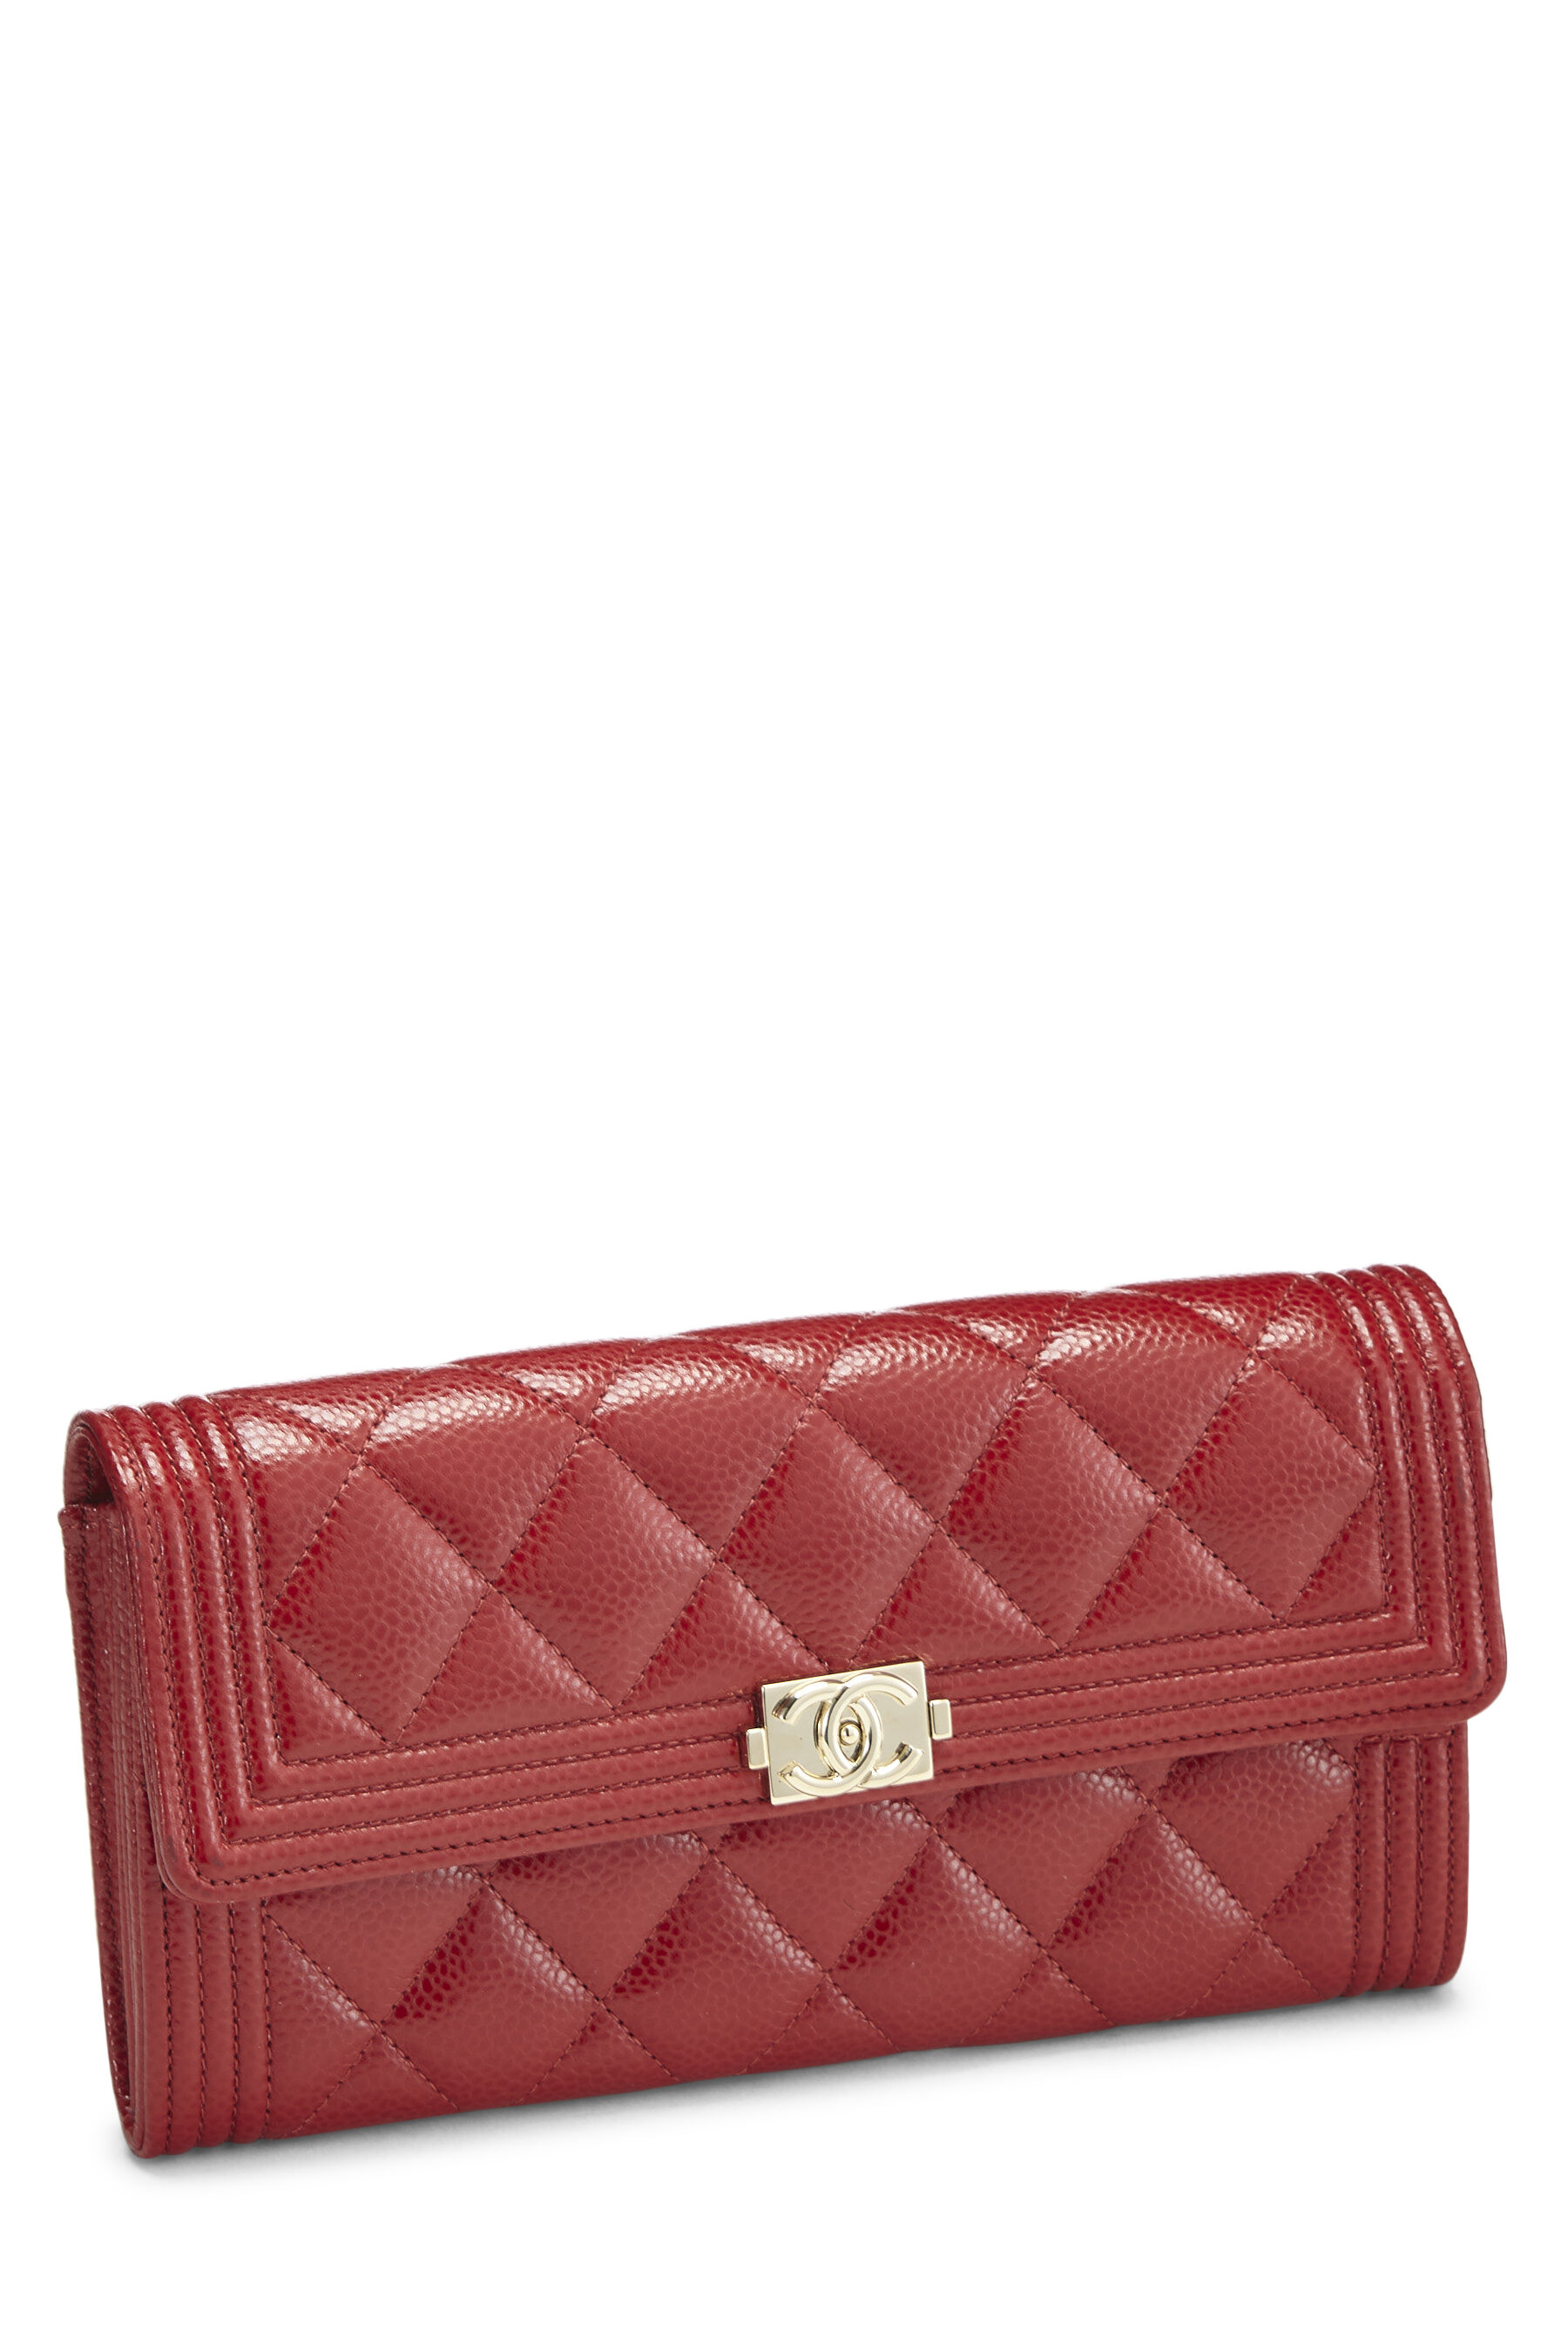 Chanel - Red Quilted Caviar Boy Wallet